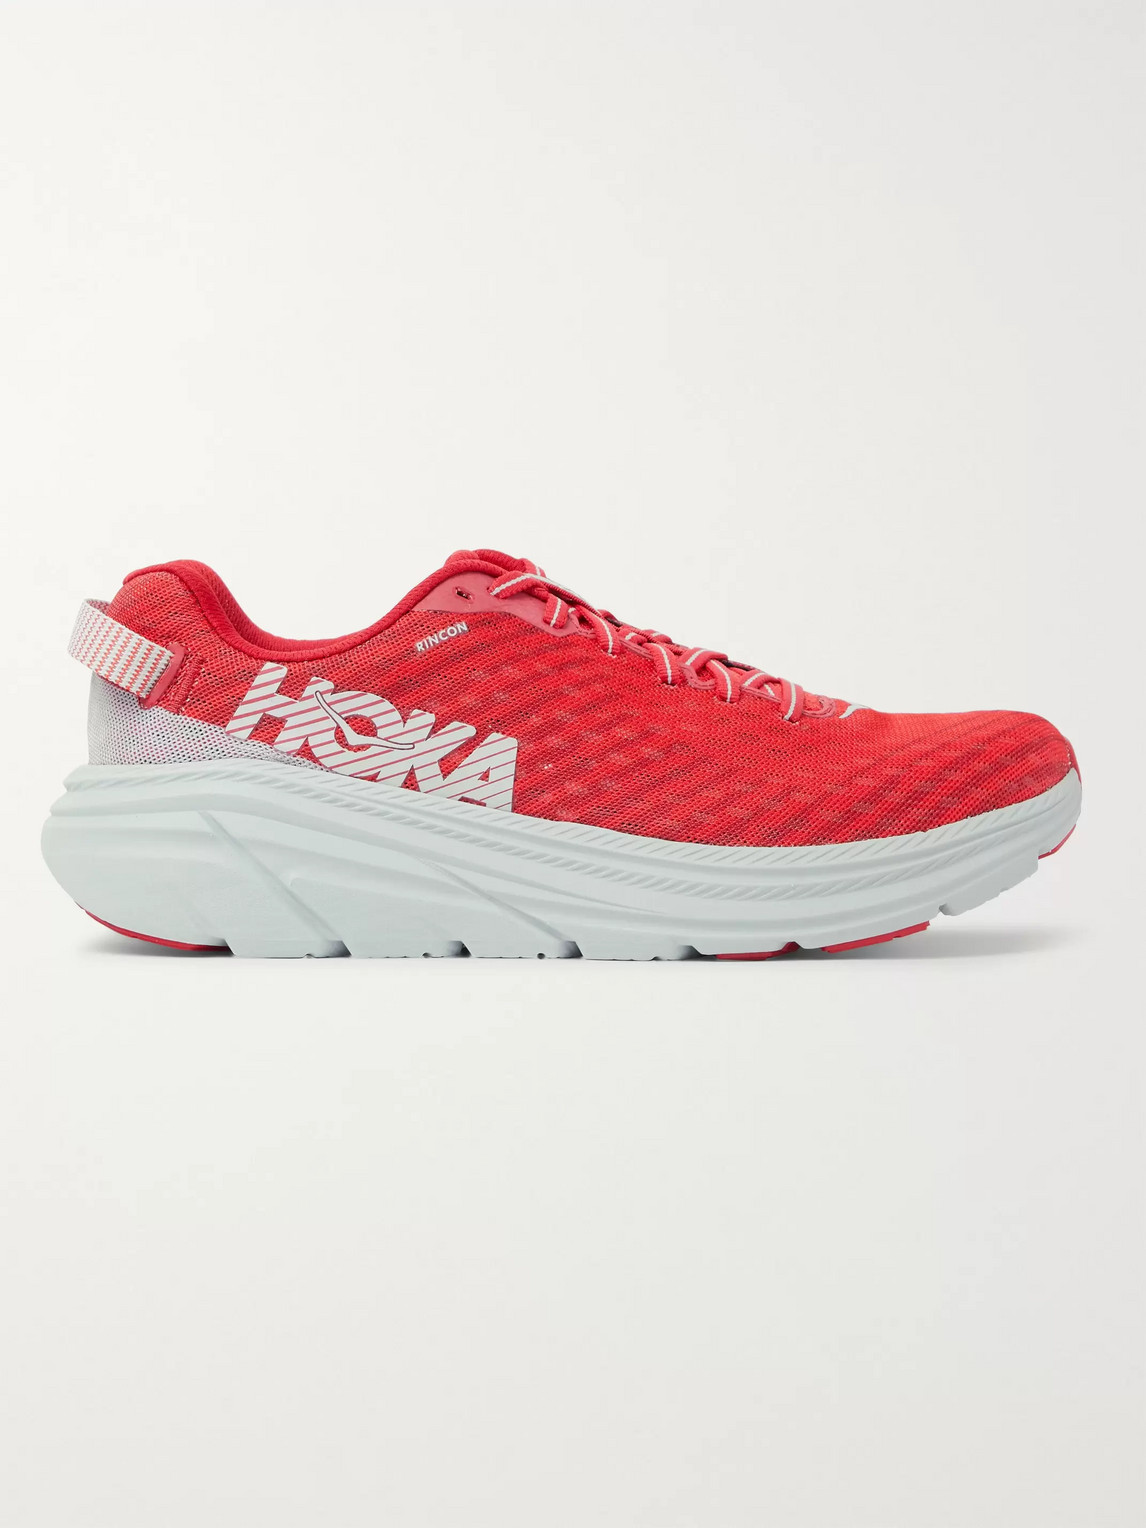 Hoka One One Rincon Mesh Running Sneakers In Red